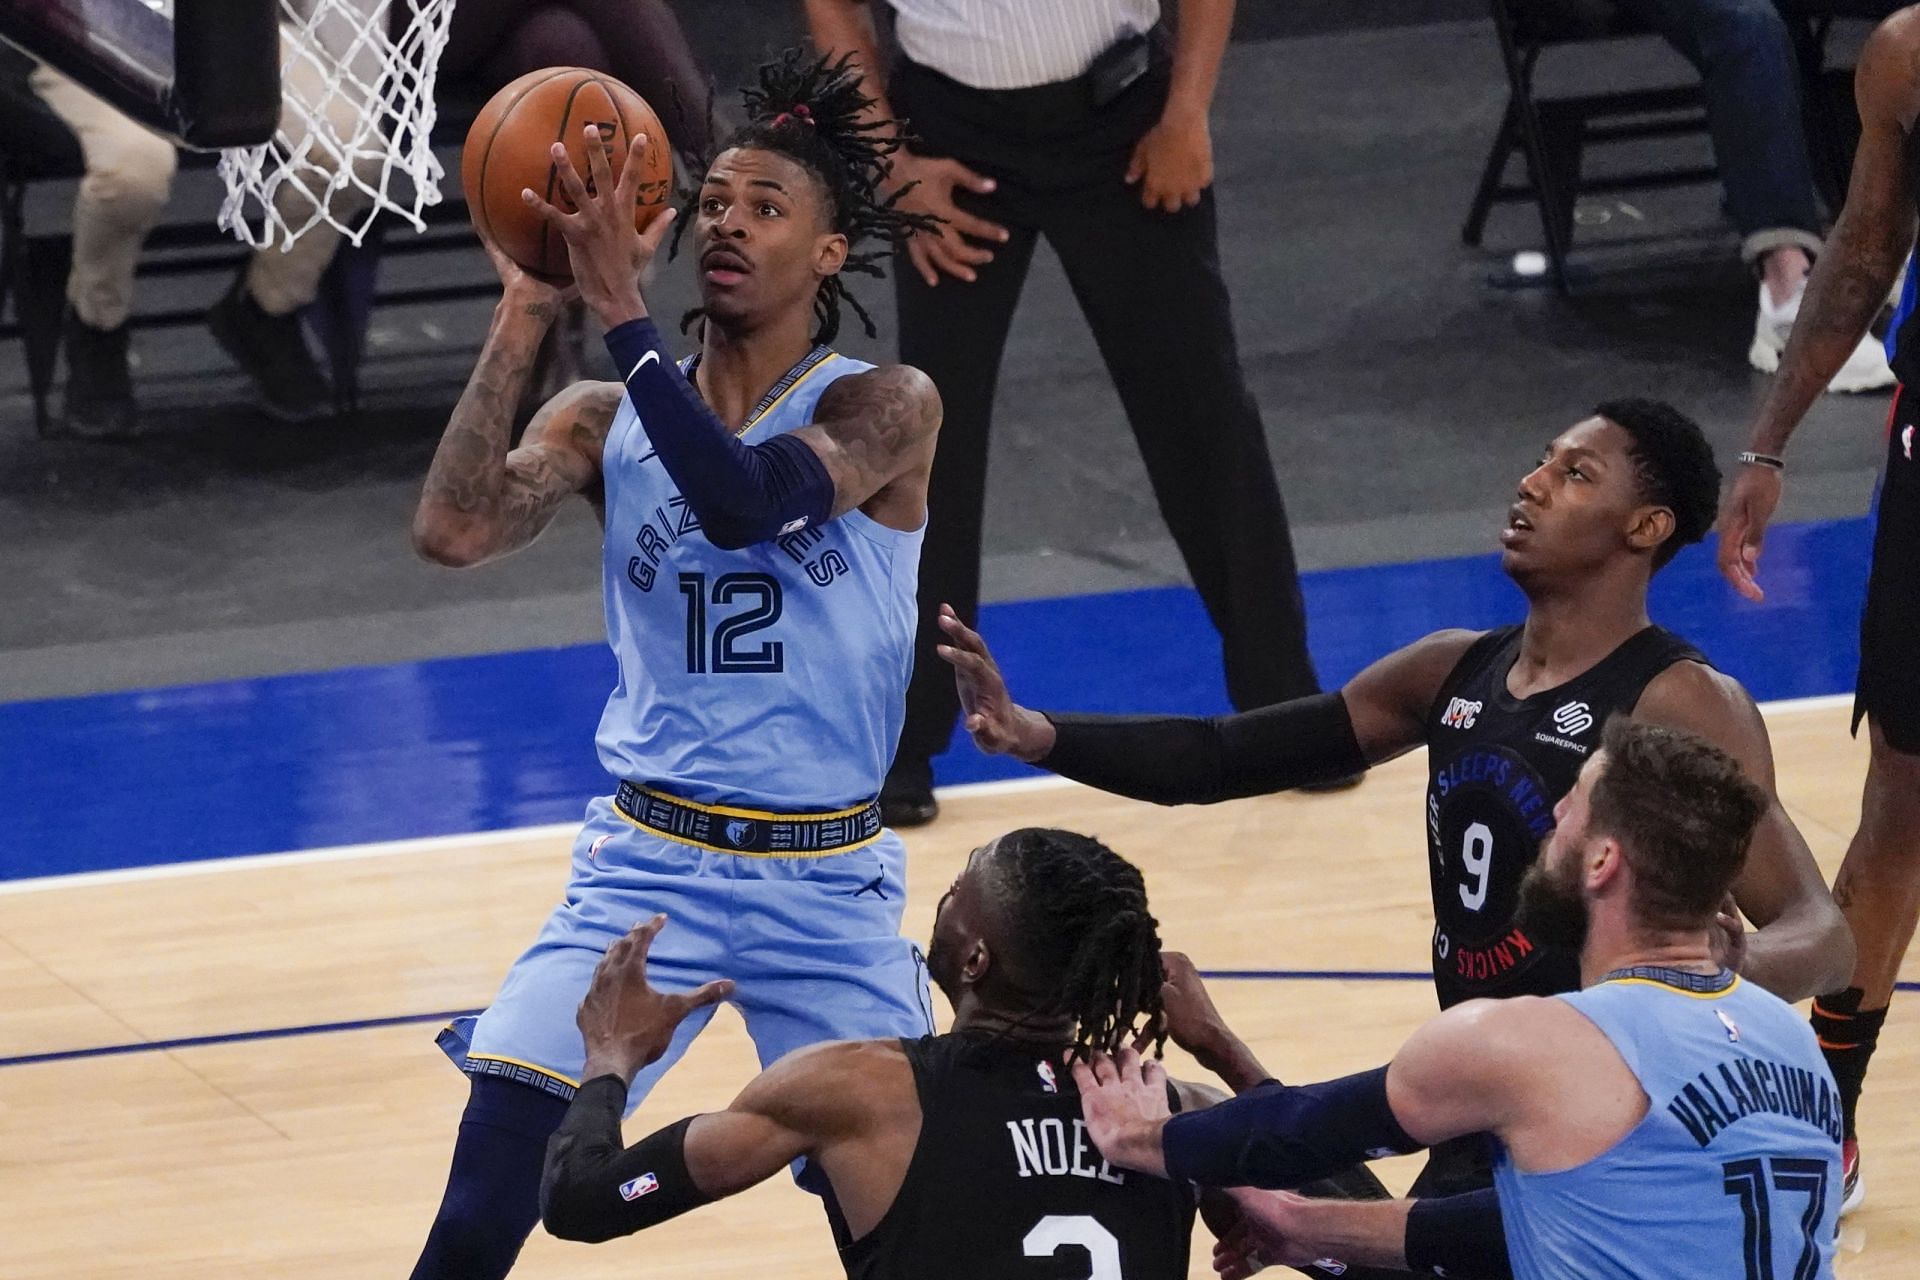 Ja Morant and the visiting Memphis Grizzlies will take on the New York Knicks on Wednesday at Madison Square Garden. [Photo: Beale Street Bears]